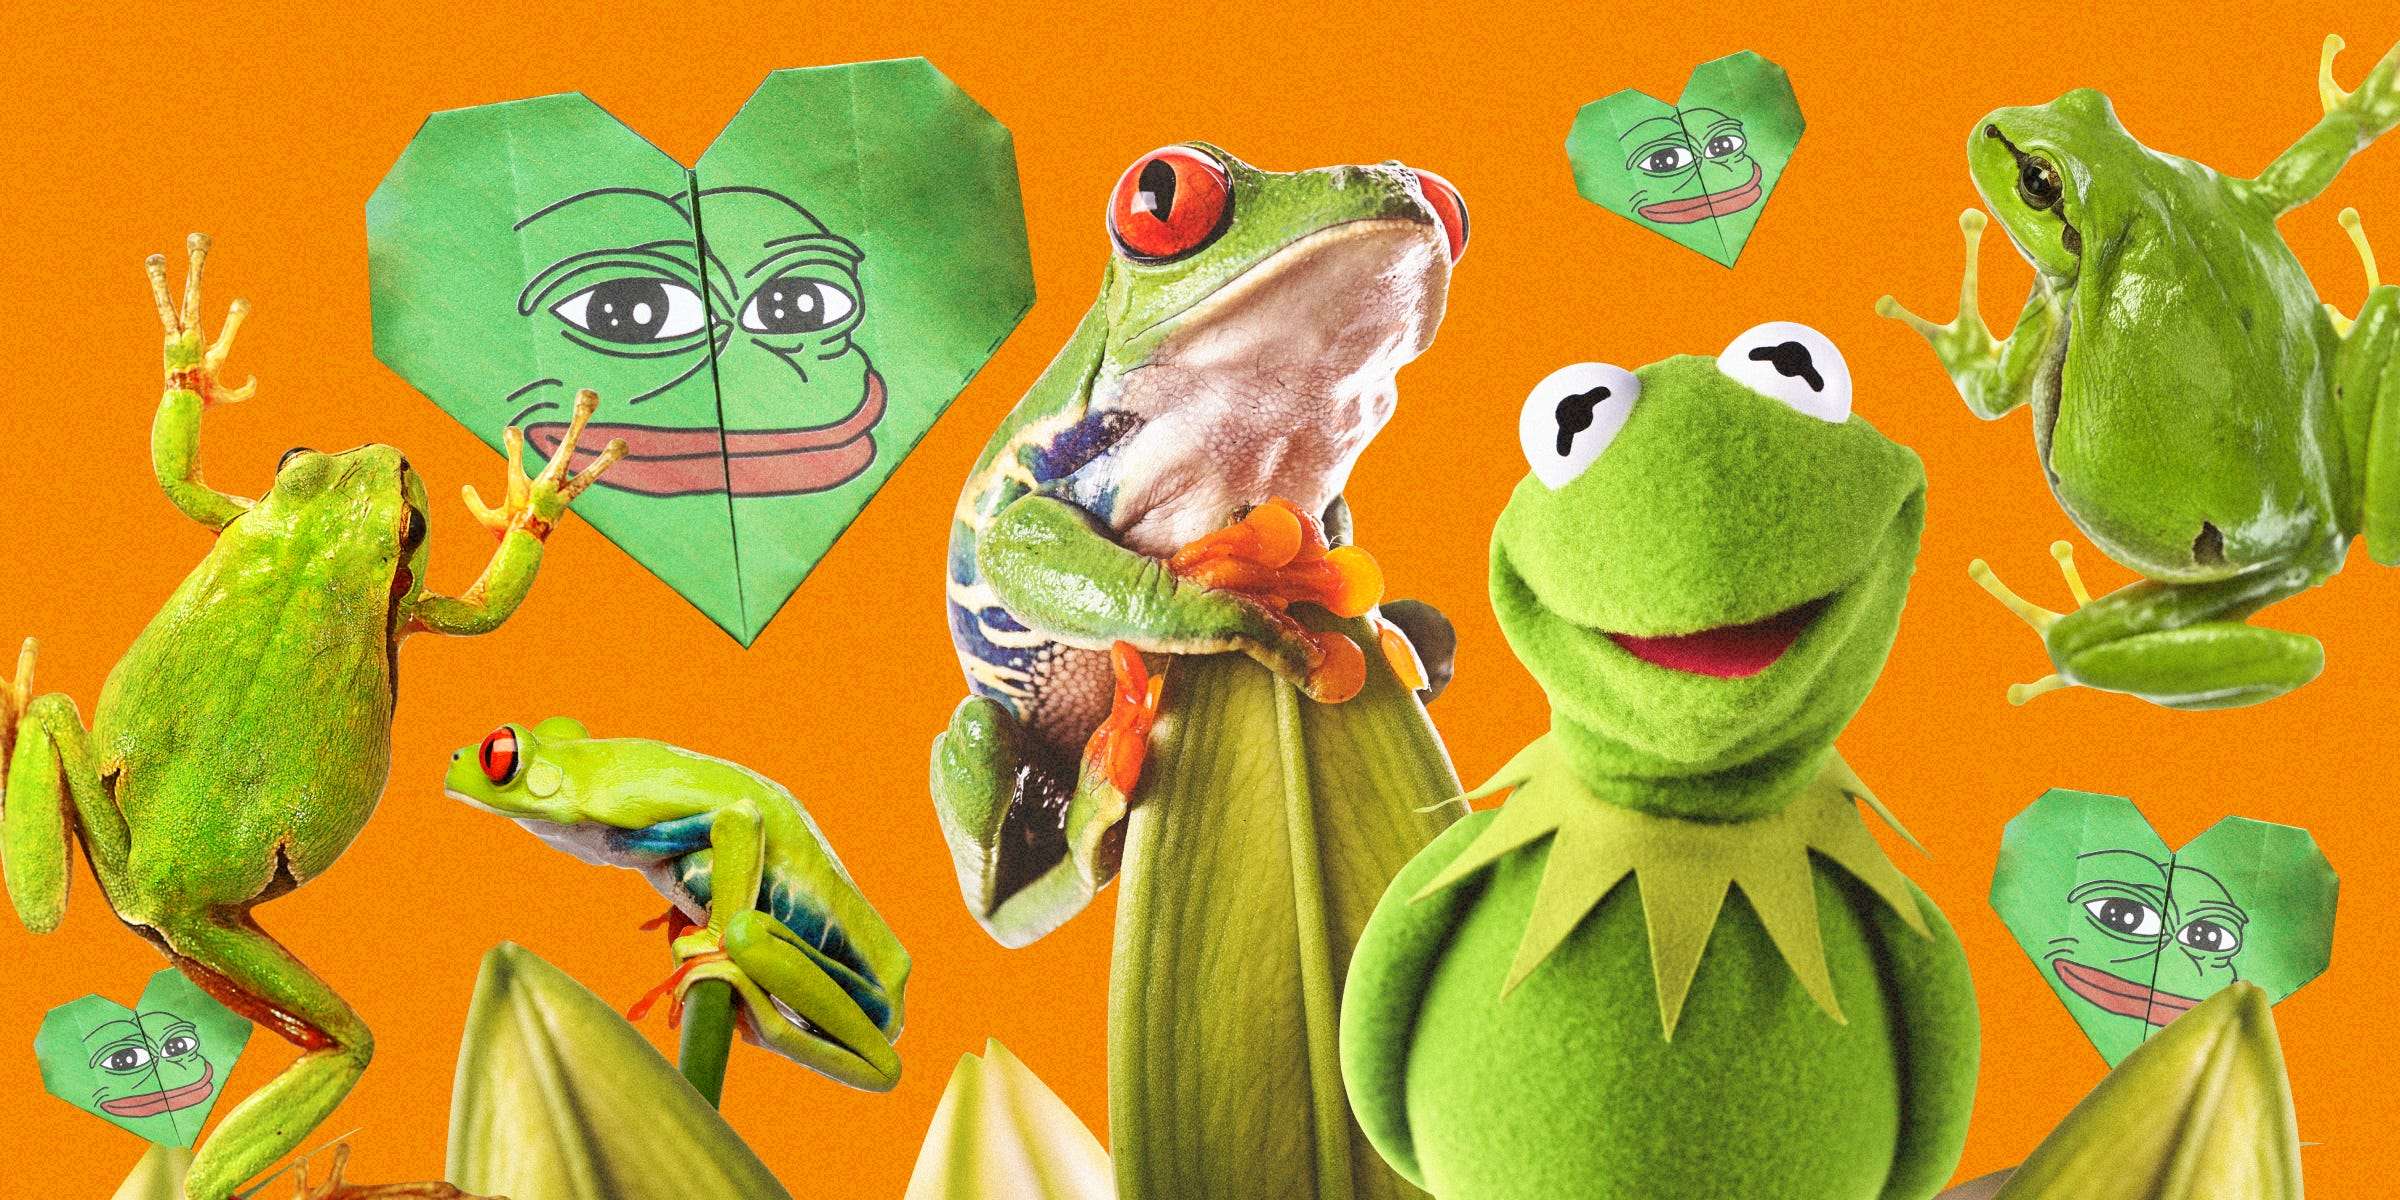 Frog Memes Are In An Internet Golden Age Having Gone Beyond Pepe